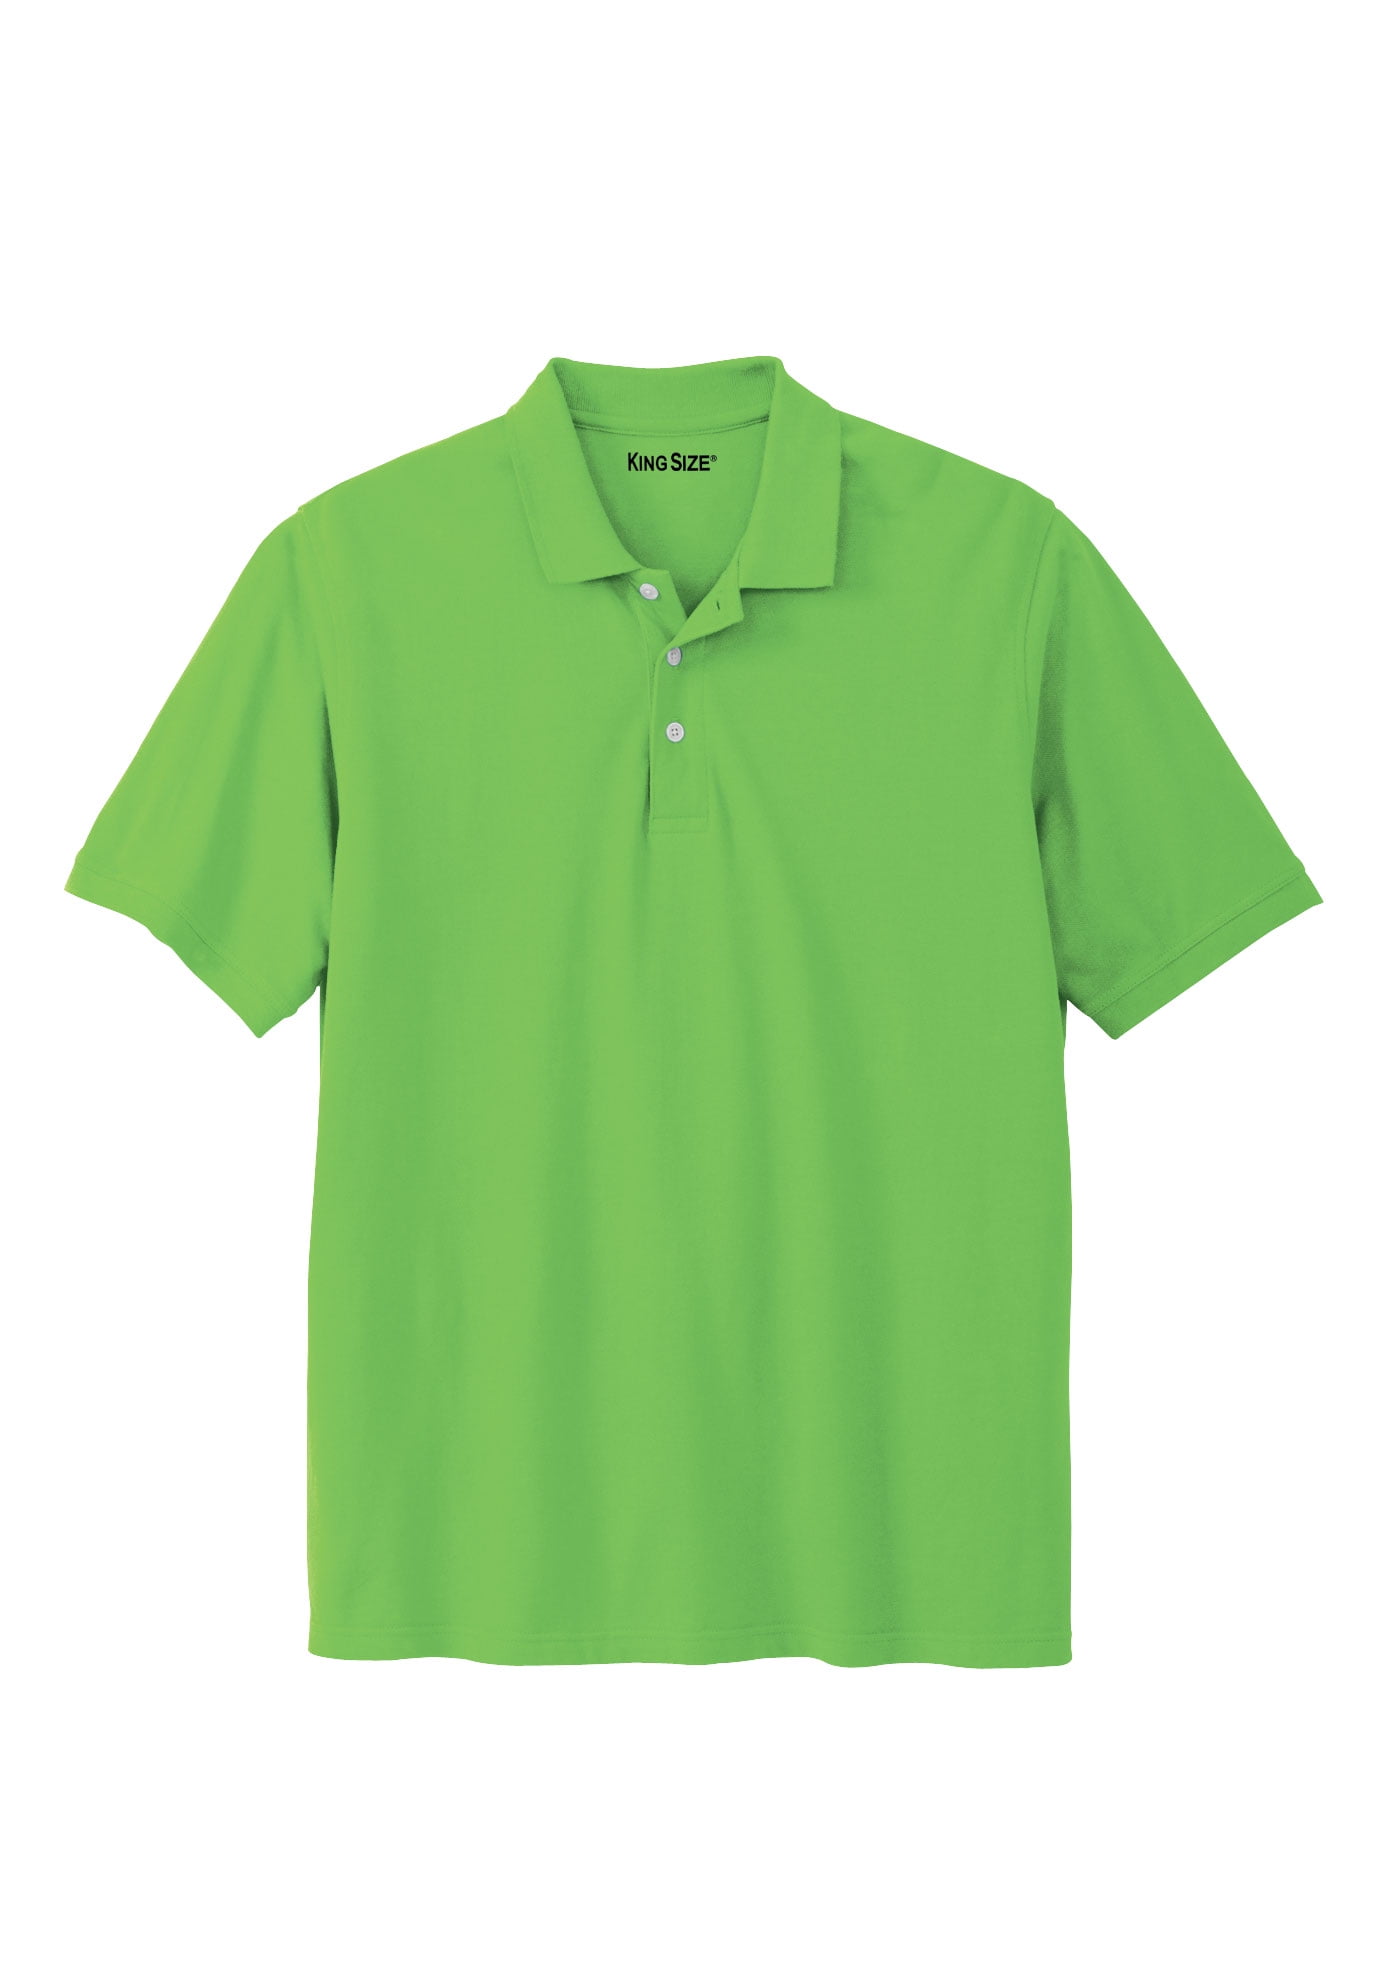 Details about   Boy's Polo style shirt LIme Green/gray Size XXL 18